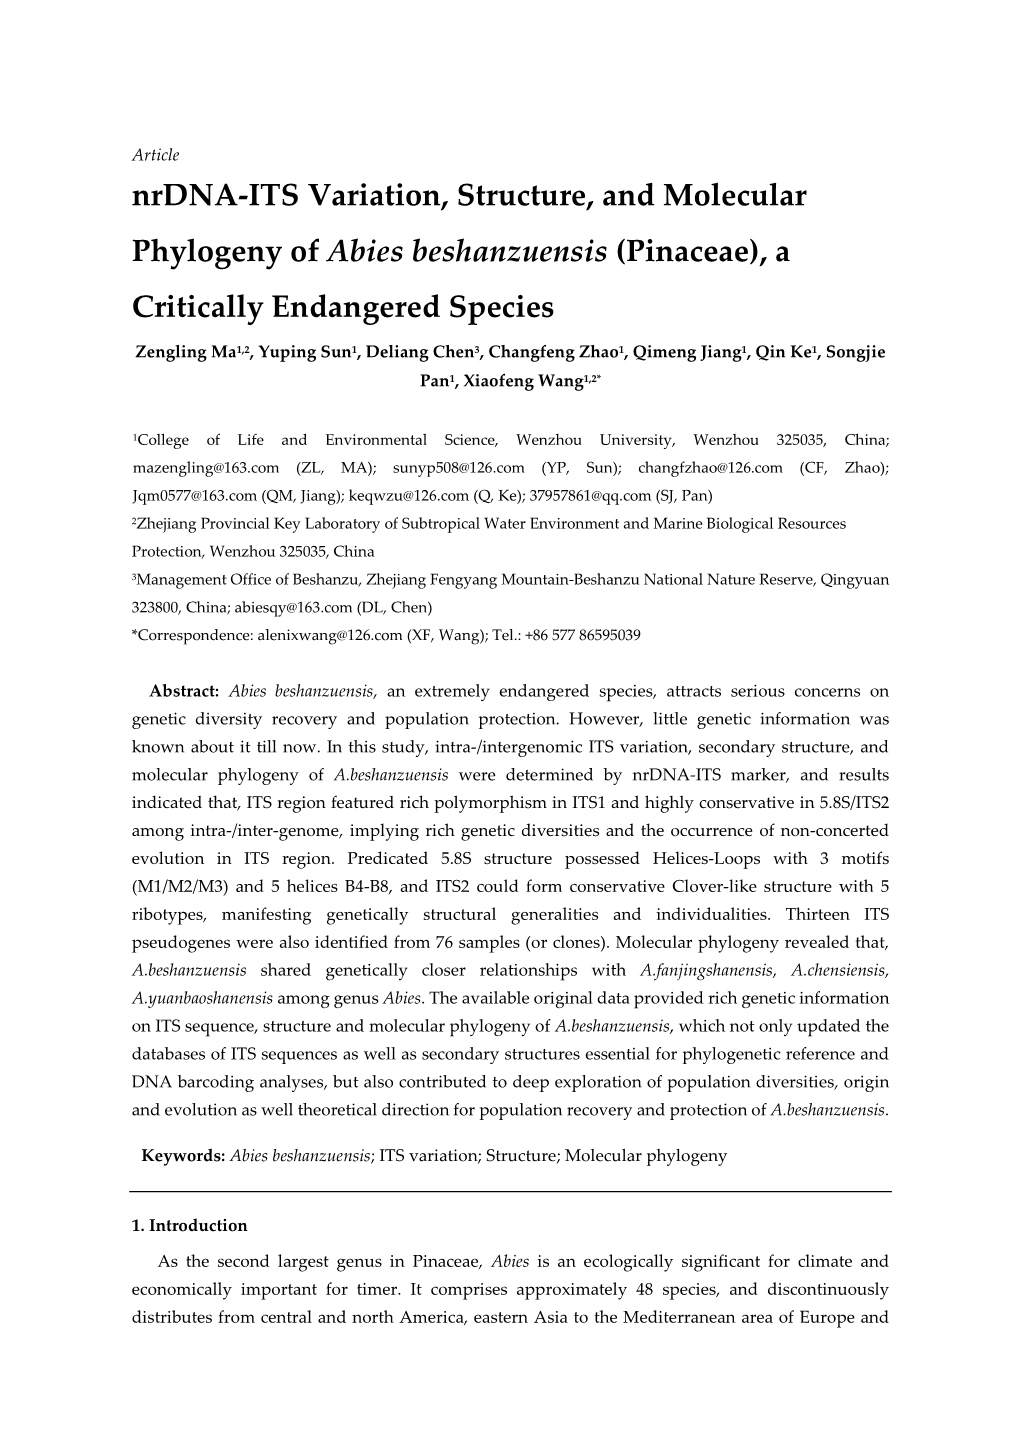 Nrdna-ITS Variation, Structure, and Molecular Phylogeny of Abies Beshanzuensis (Pinaceae), a Critically Endangered Species